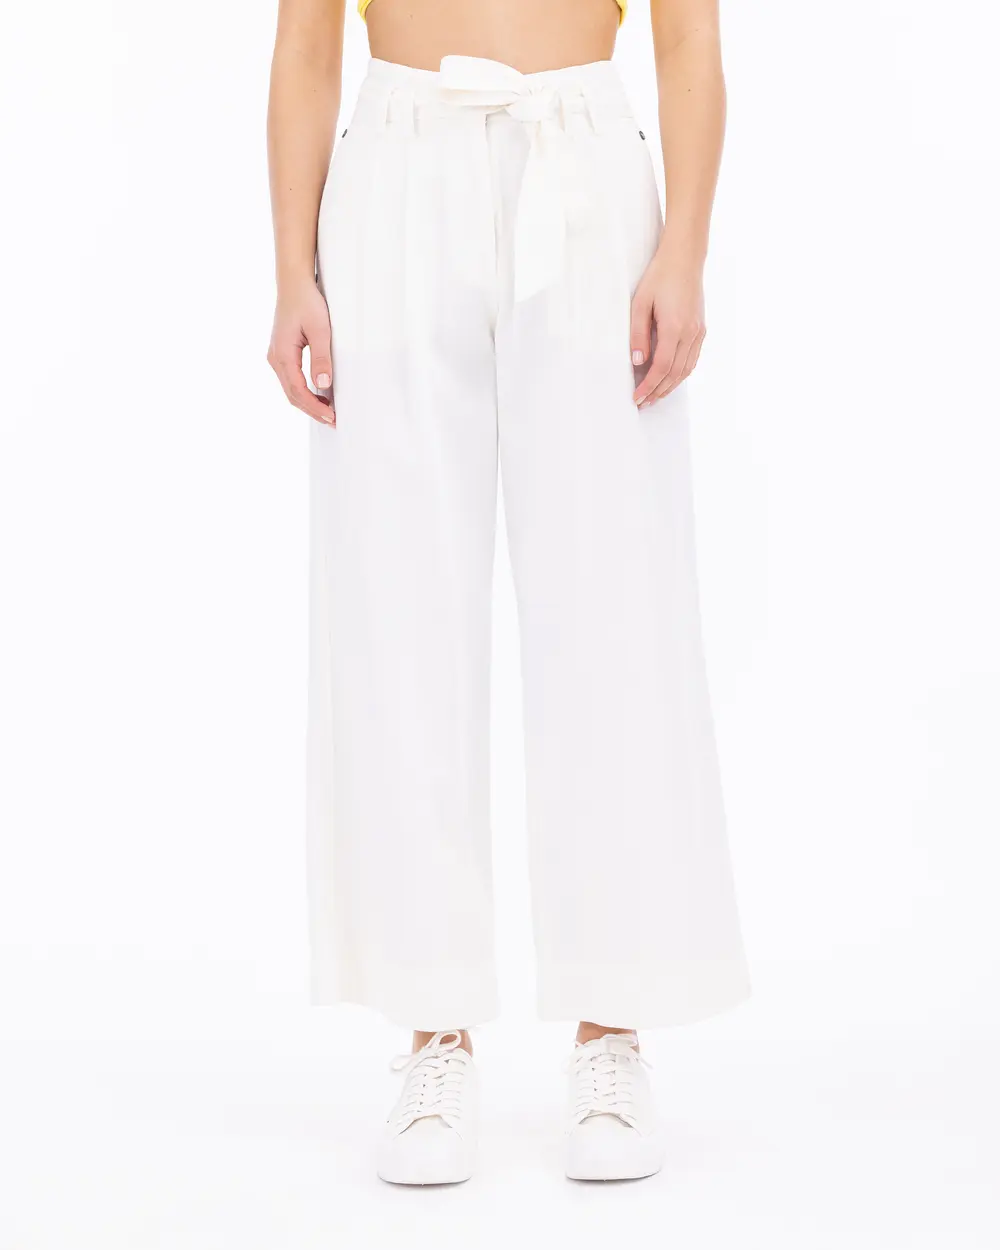 Wide Cut Staple Detailed Pocket Trousers